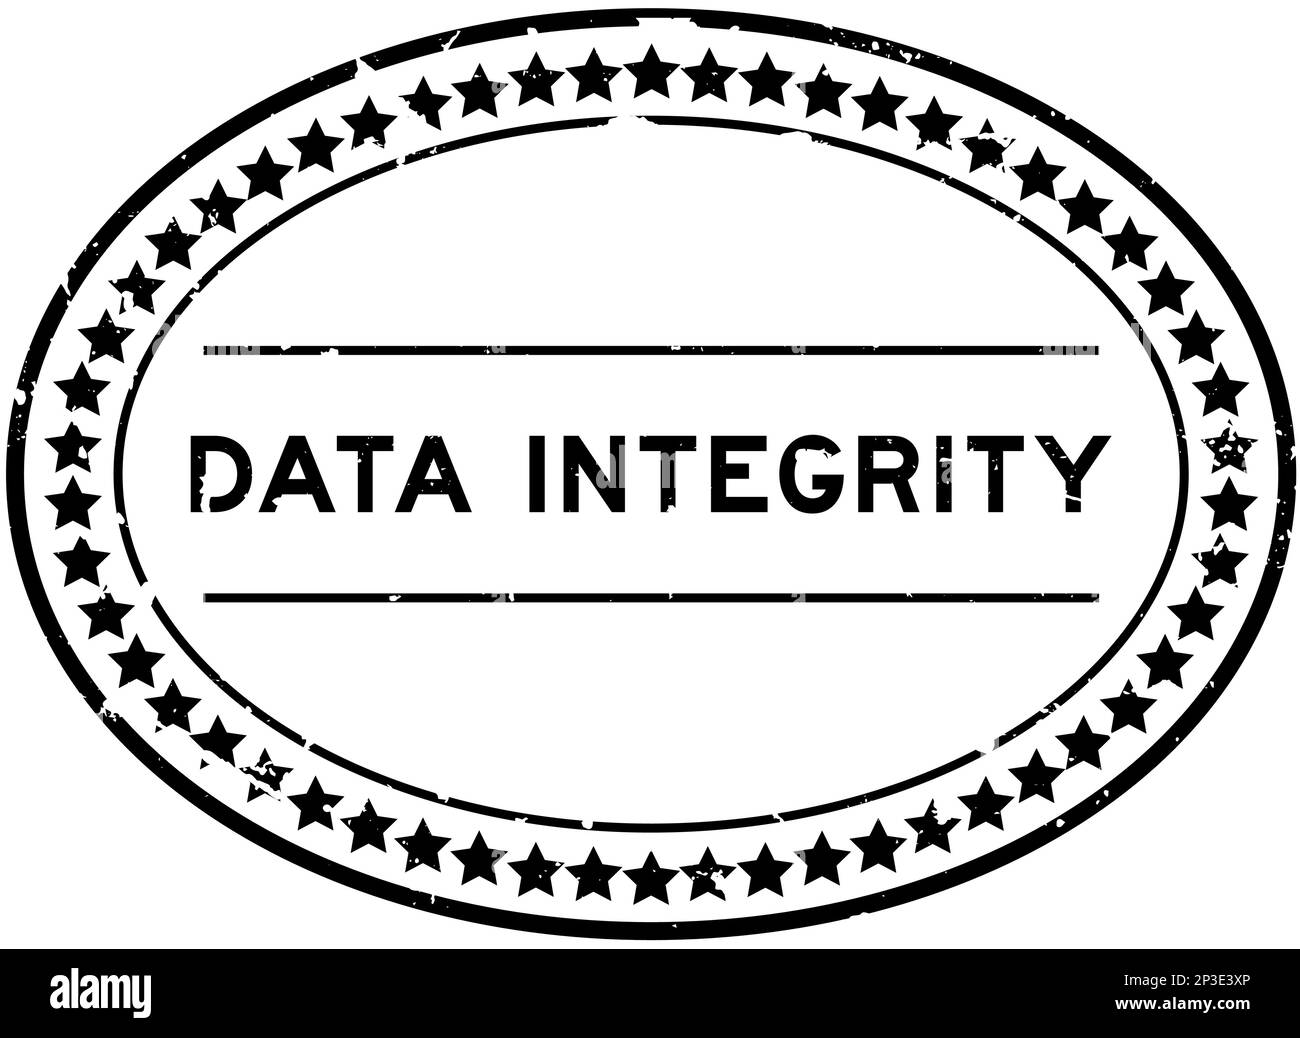 Grunge black data integrity word oval rubber seal stamp on white background Stock Vector